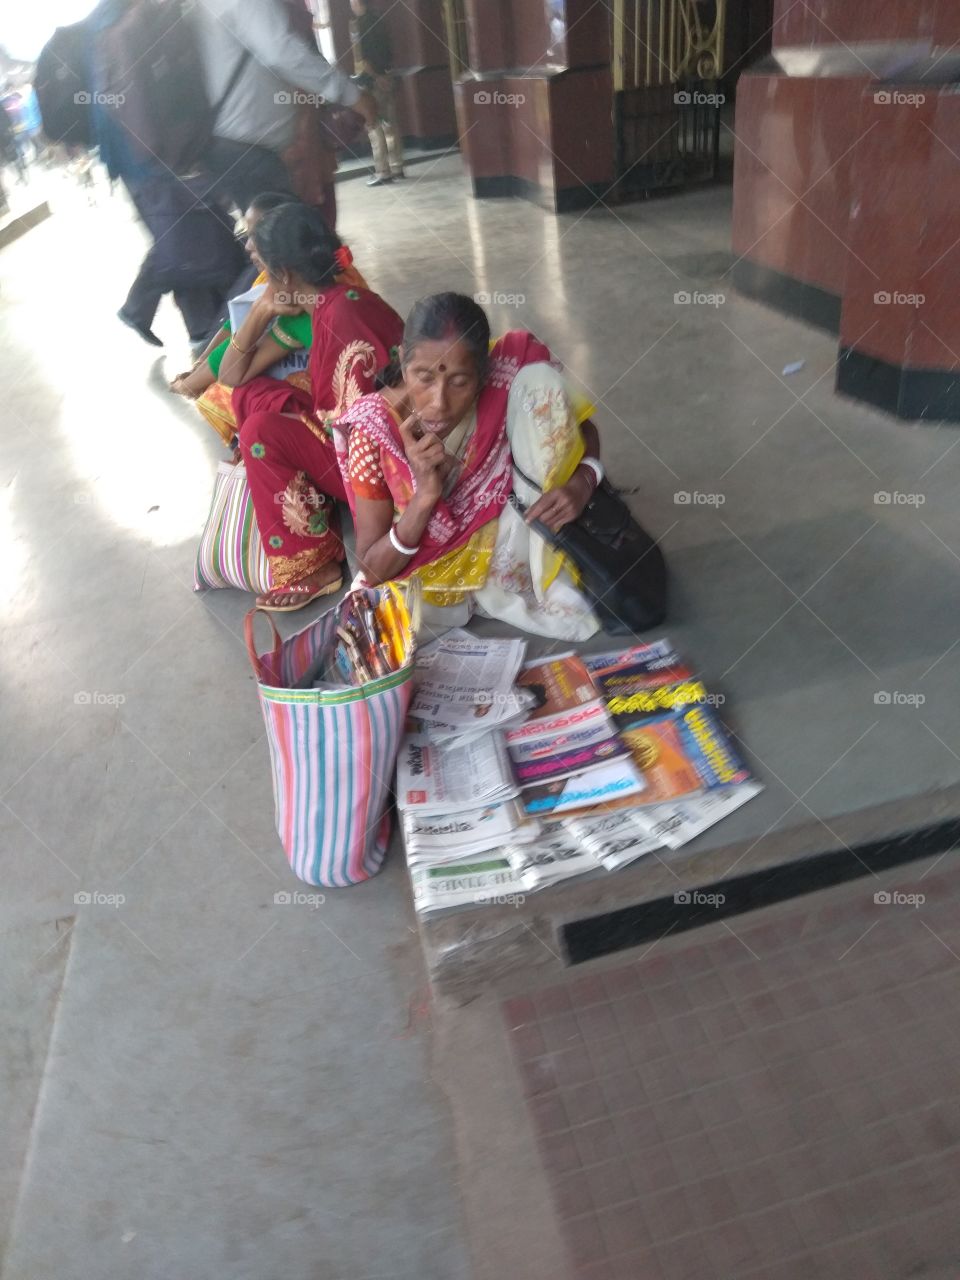 No taker of Evening News paper at Howrah Station